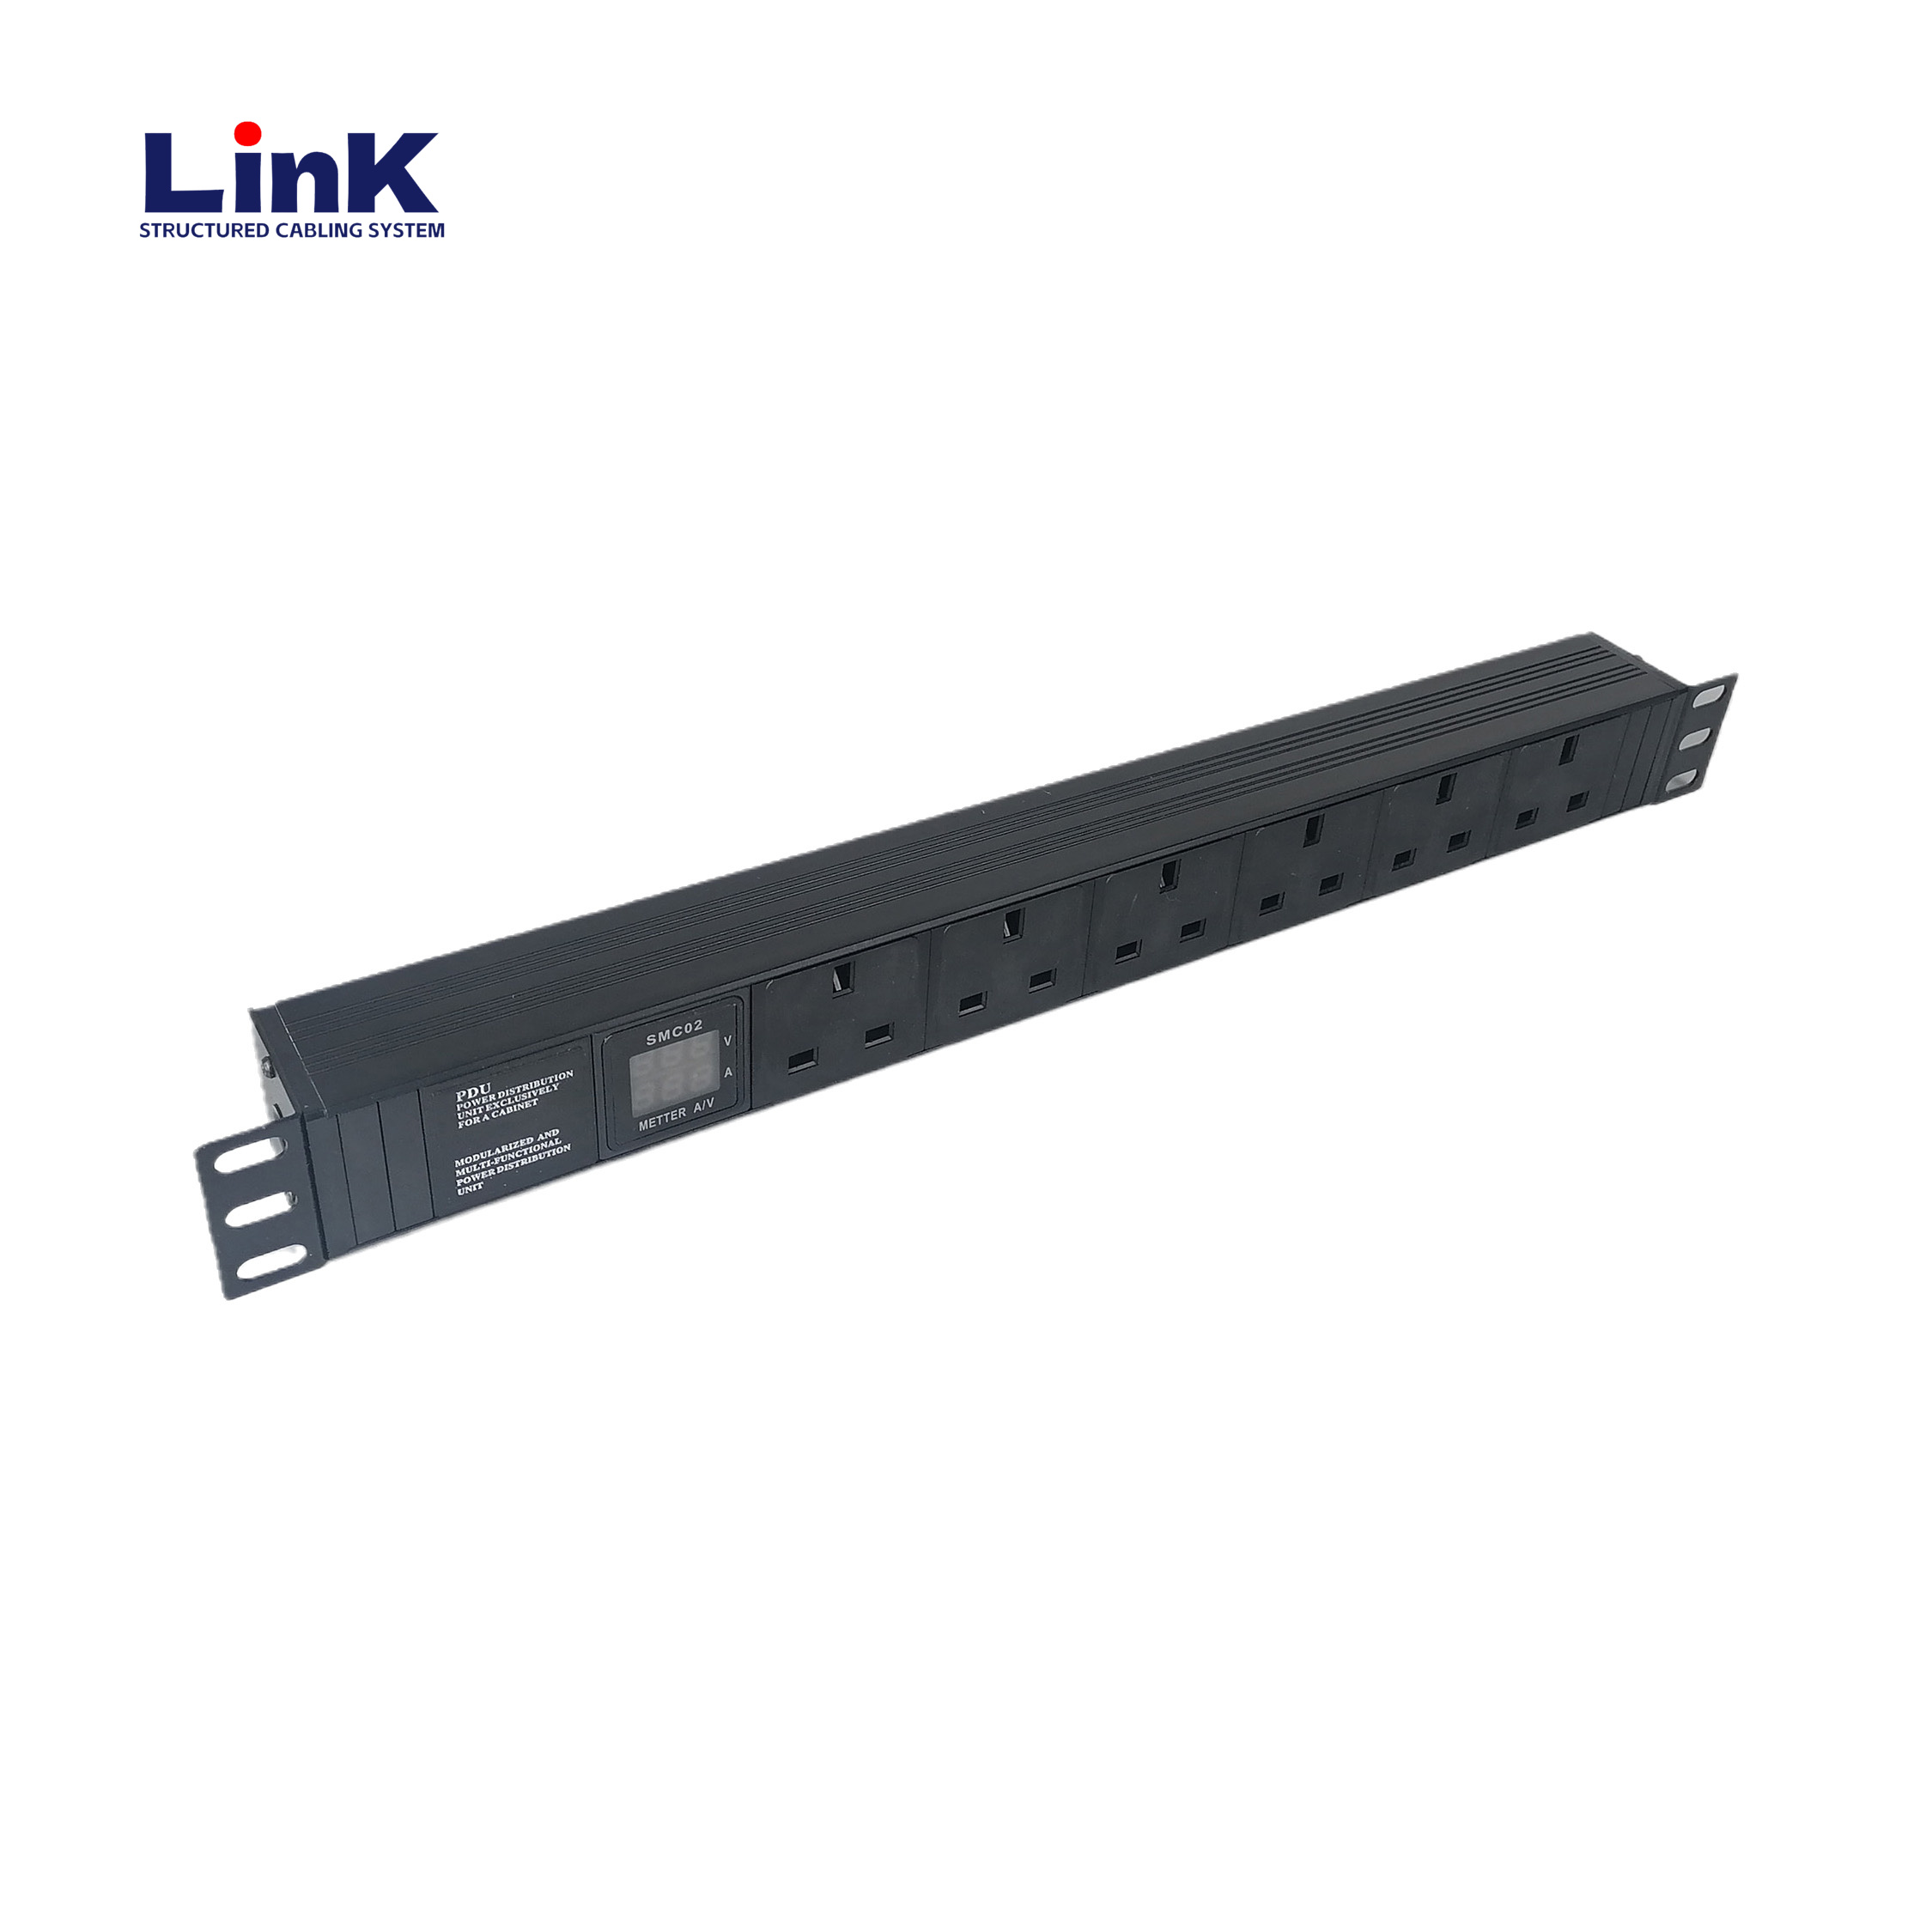 Power Distribution Unit Rack Mount Intelligent PDU 16A 8-Outlet Rack-Mount PDU with Overload Protection